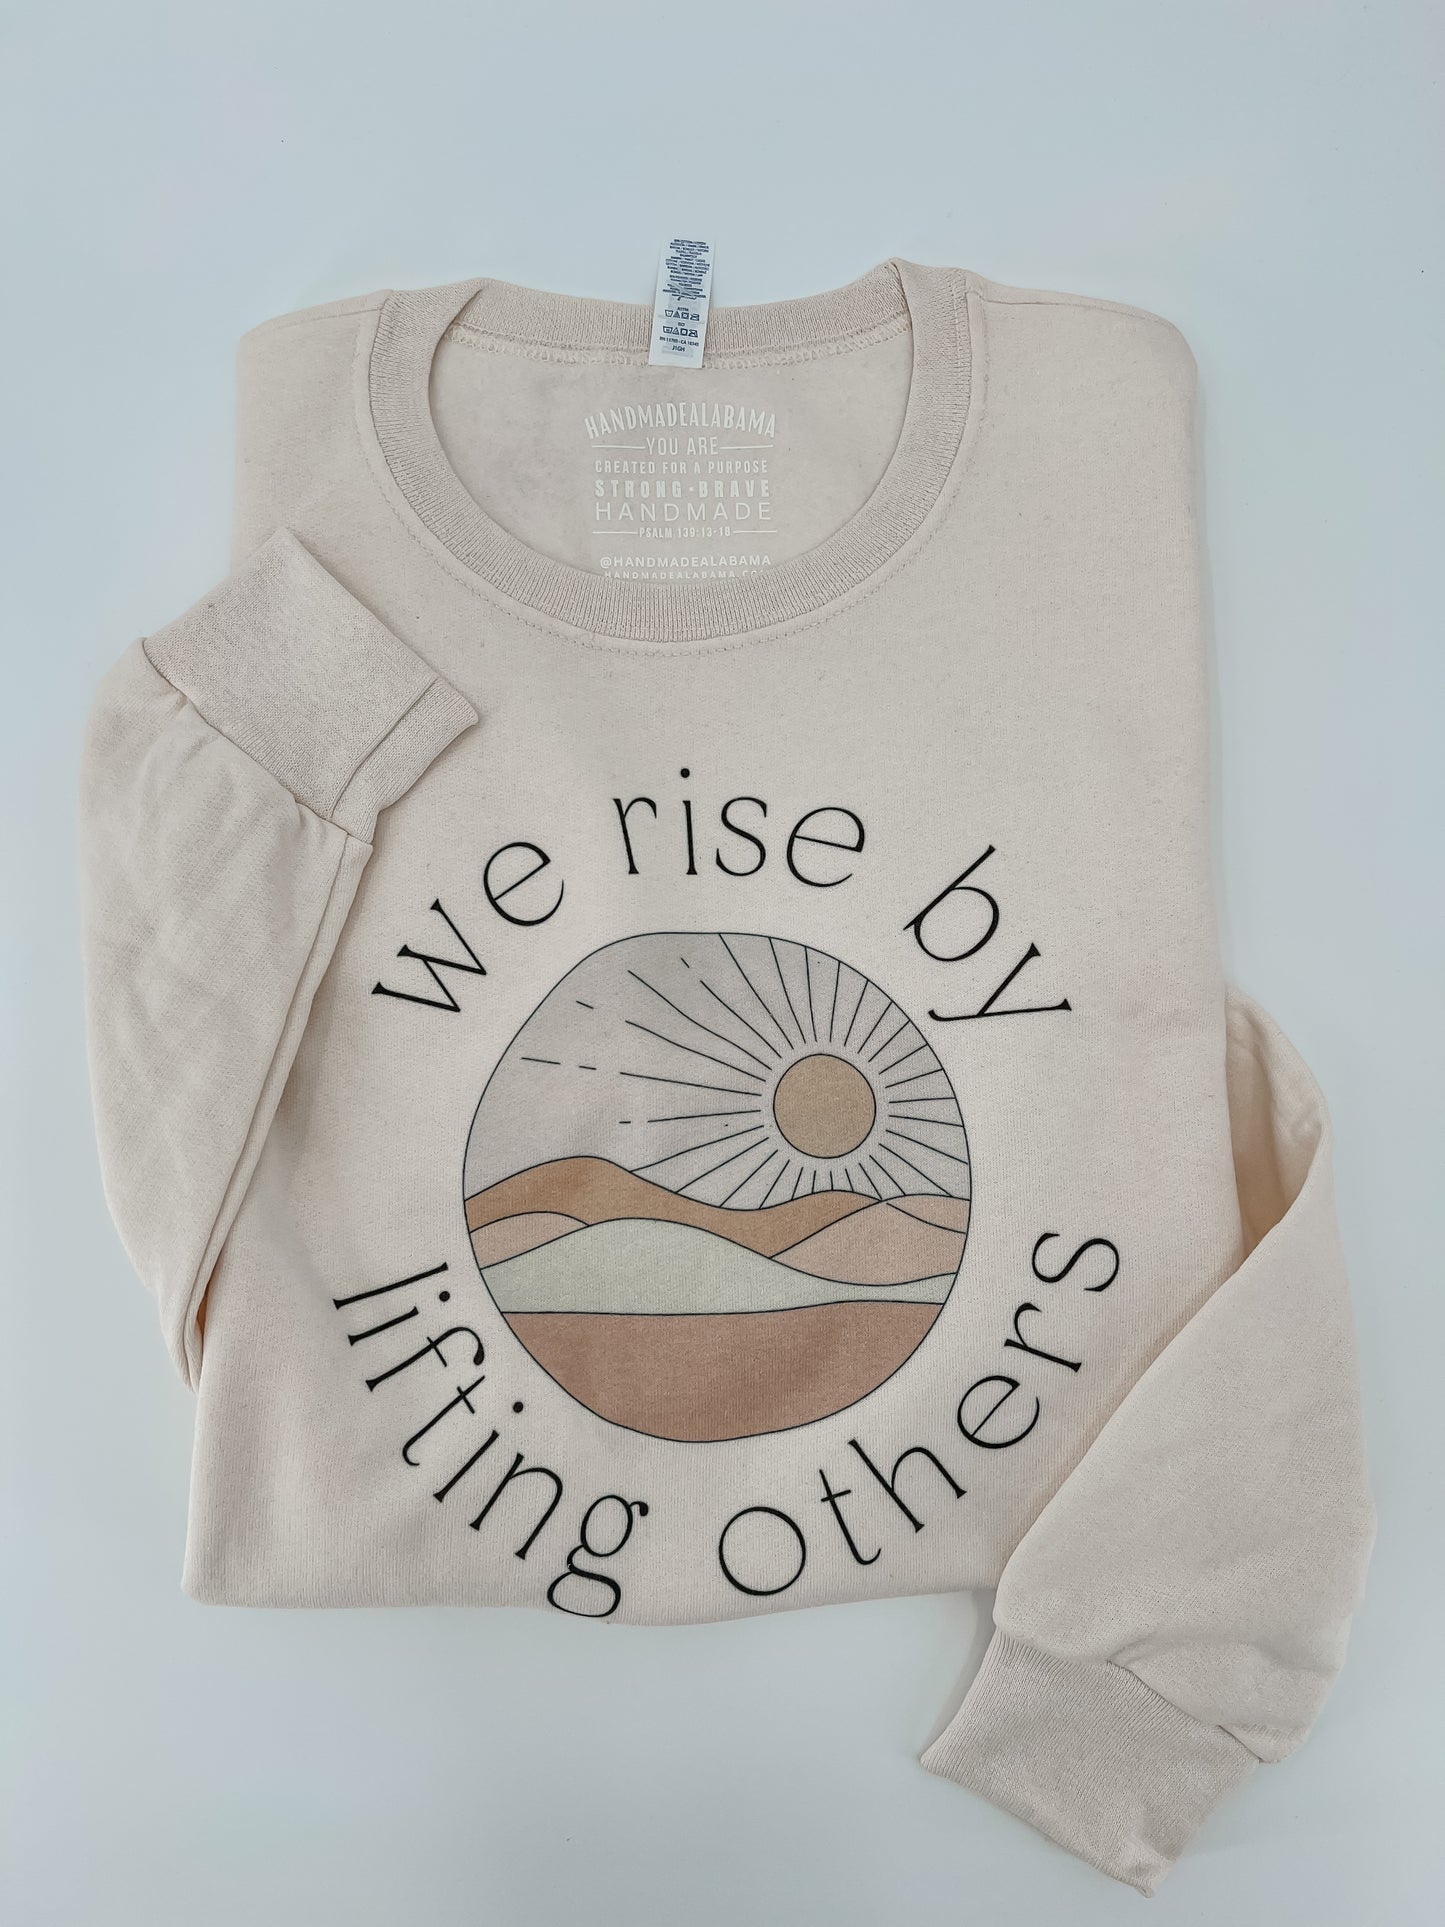 We Rise By Lifting Others Sweatshirt